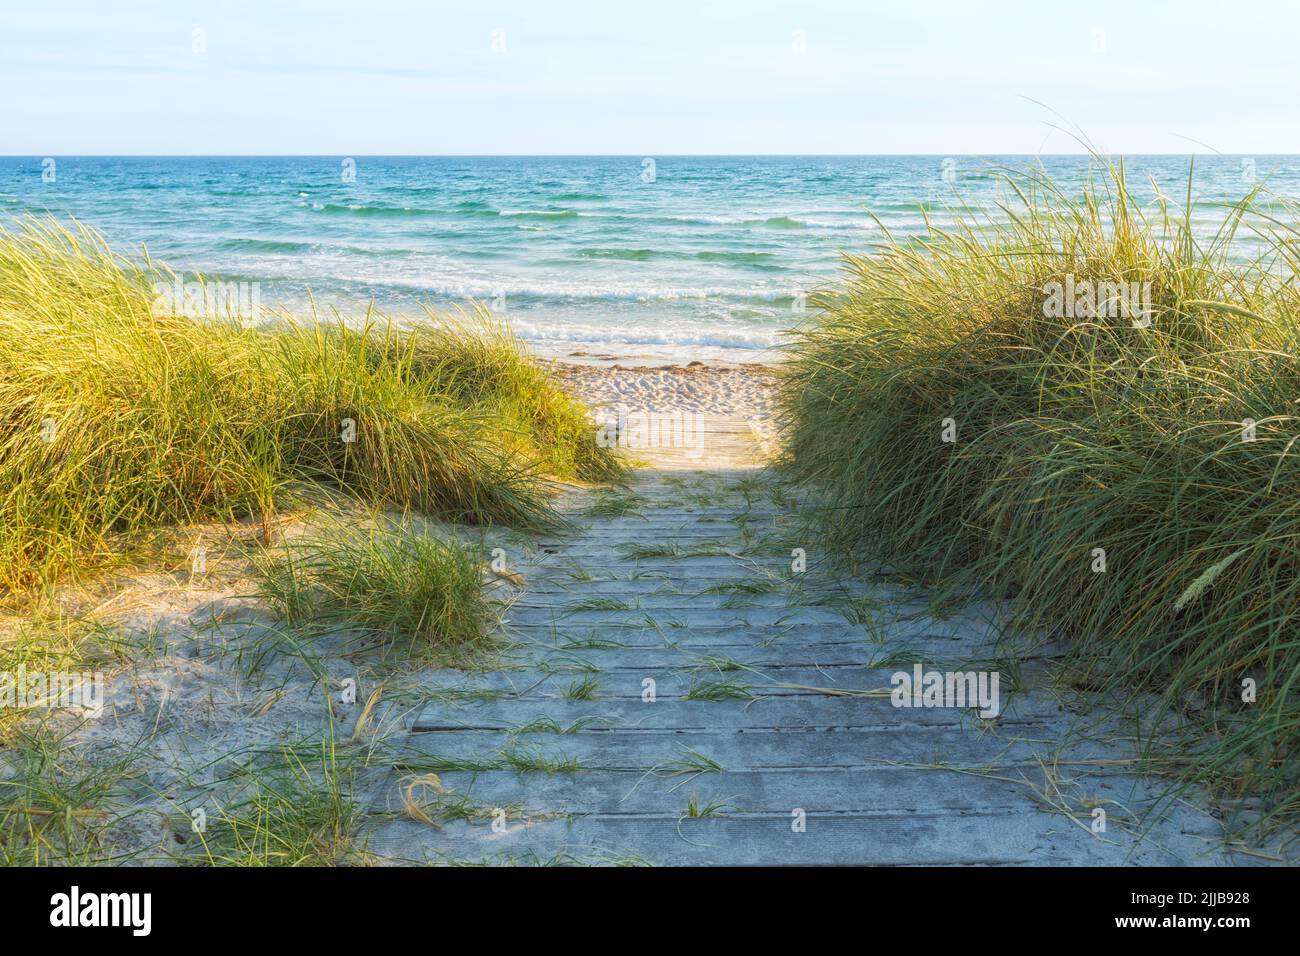 Wooden path to the beach of Ristinge, Baltic Sea island of Langeland, Denmark Stock Photo